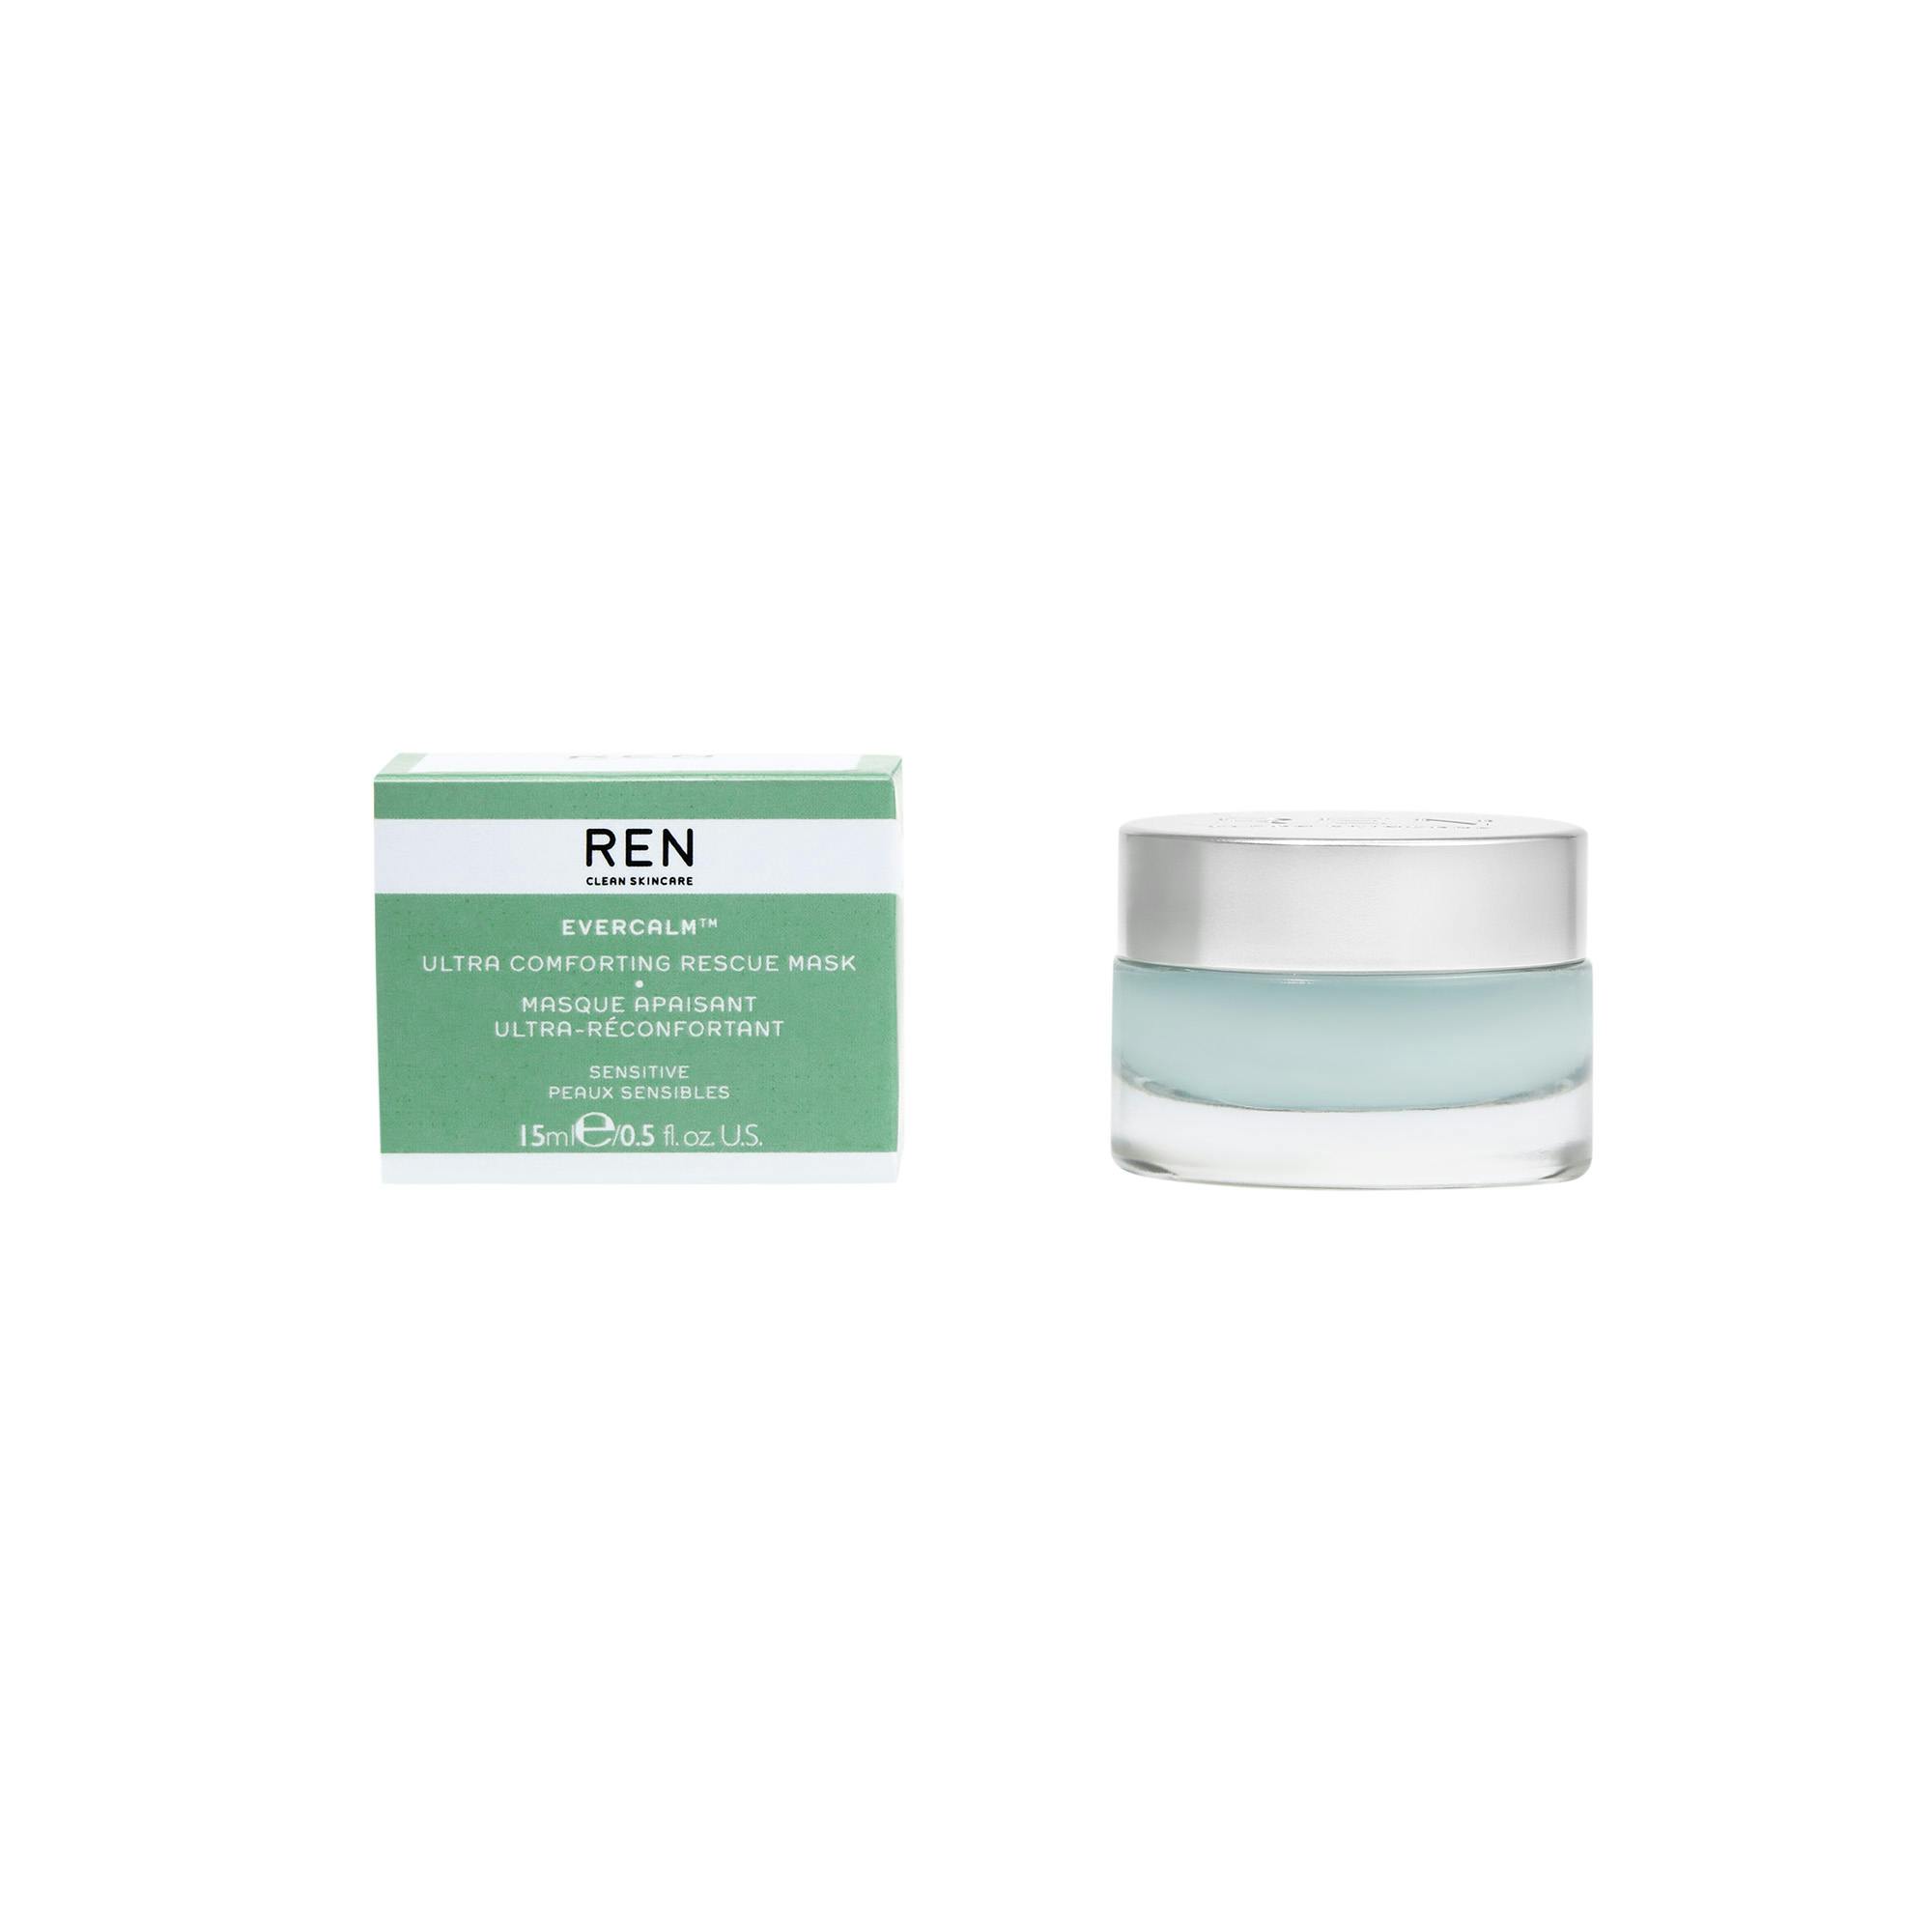 rencleanskincare REN Clean Skincare Evercalm Ultra Comforting Rescue Mask 15ml